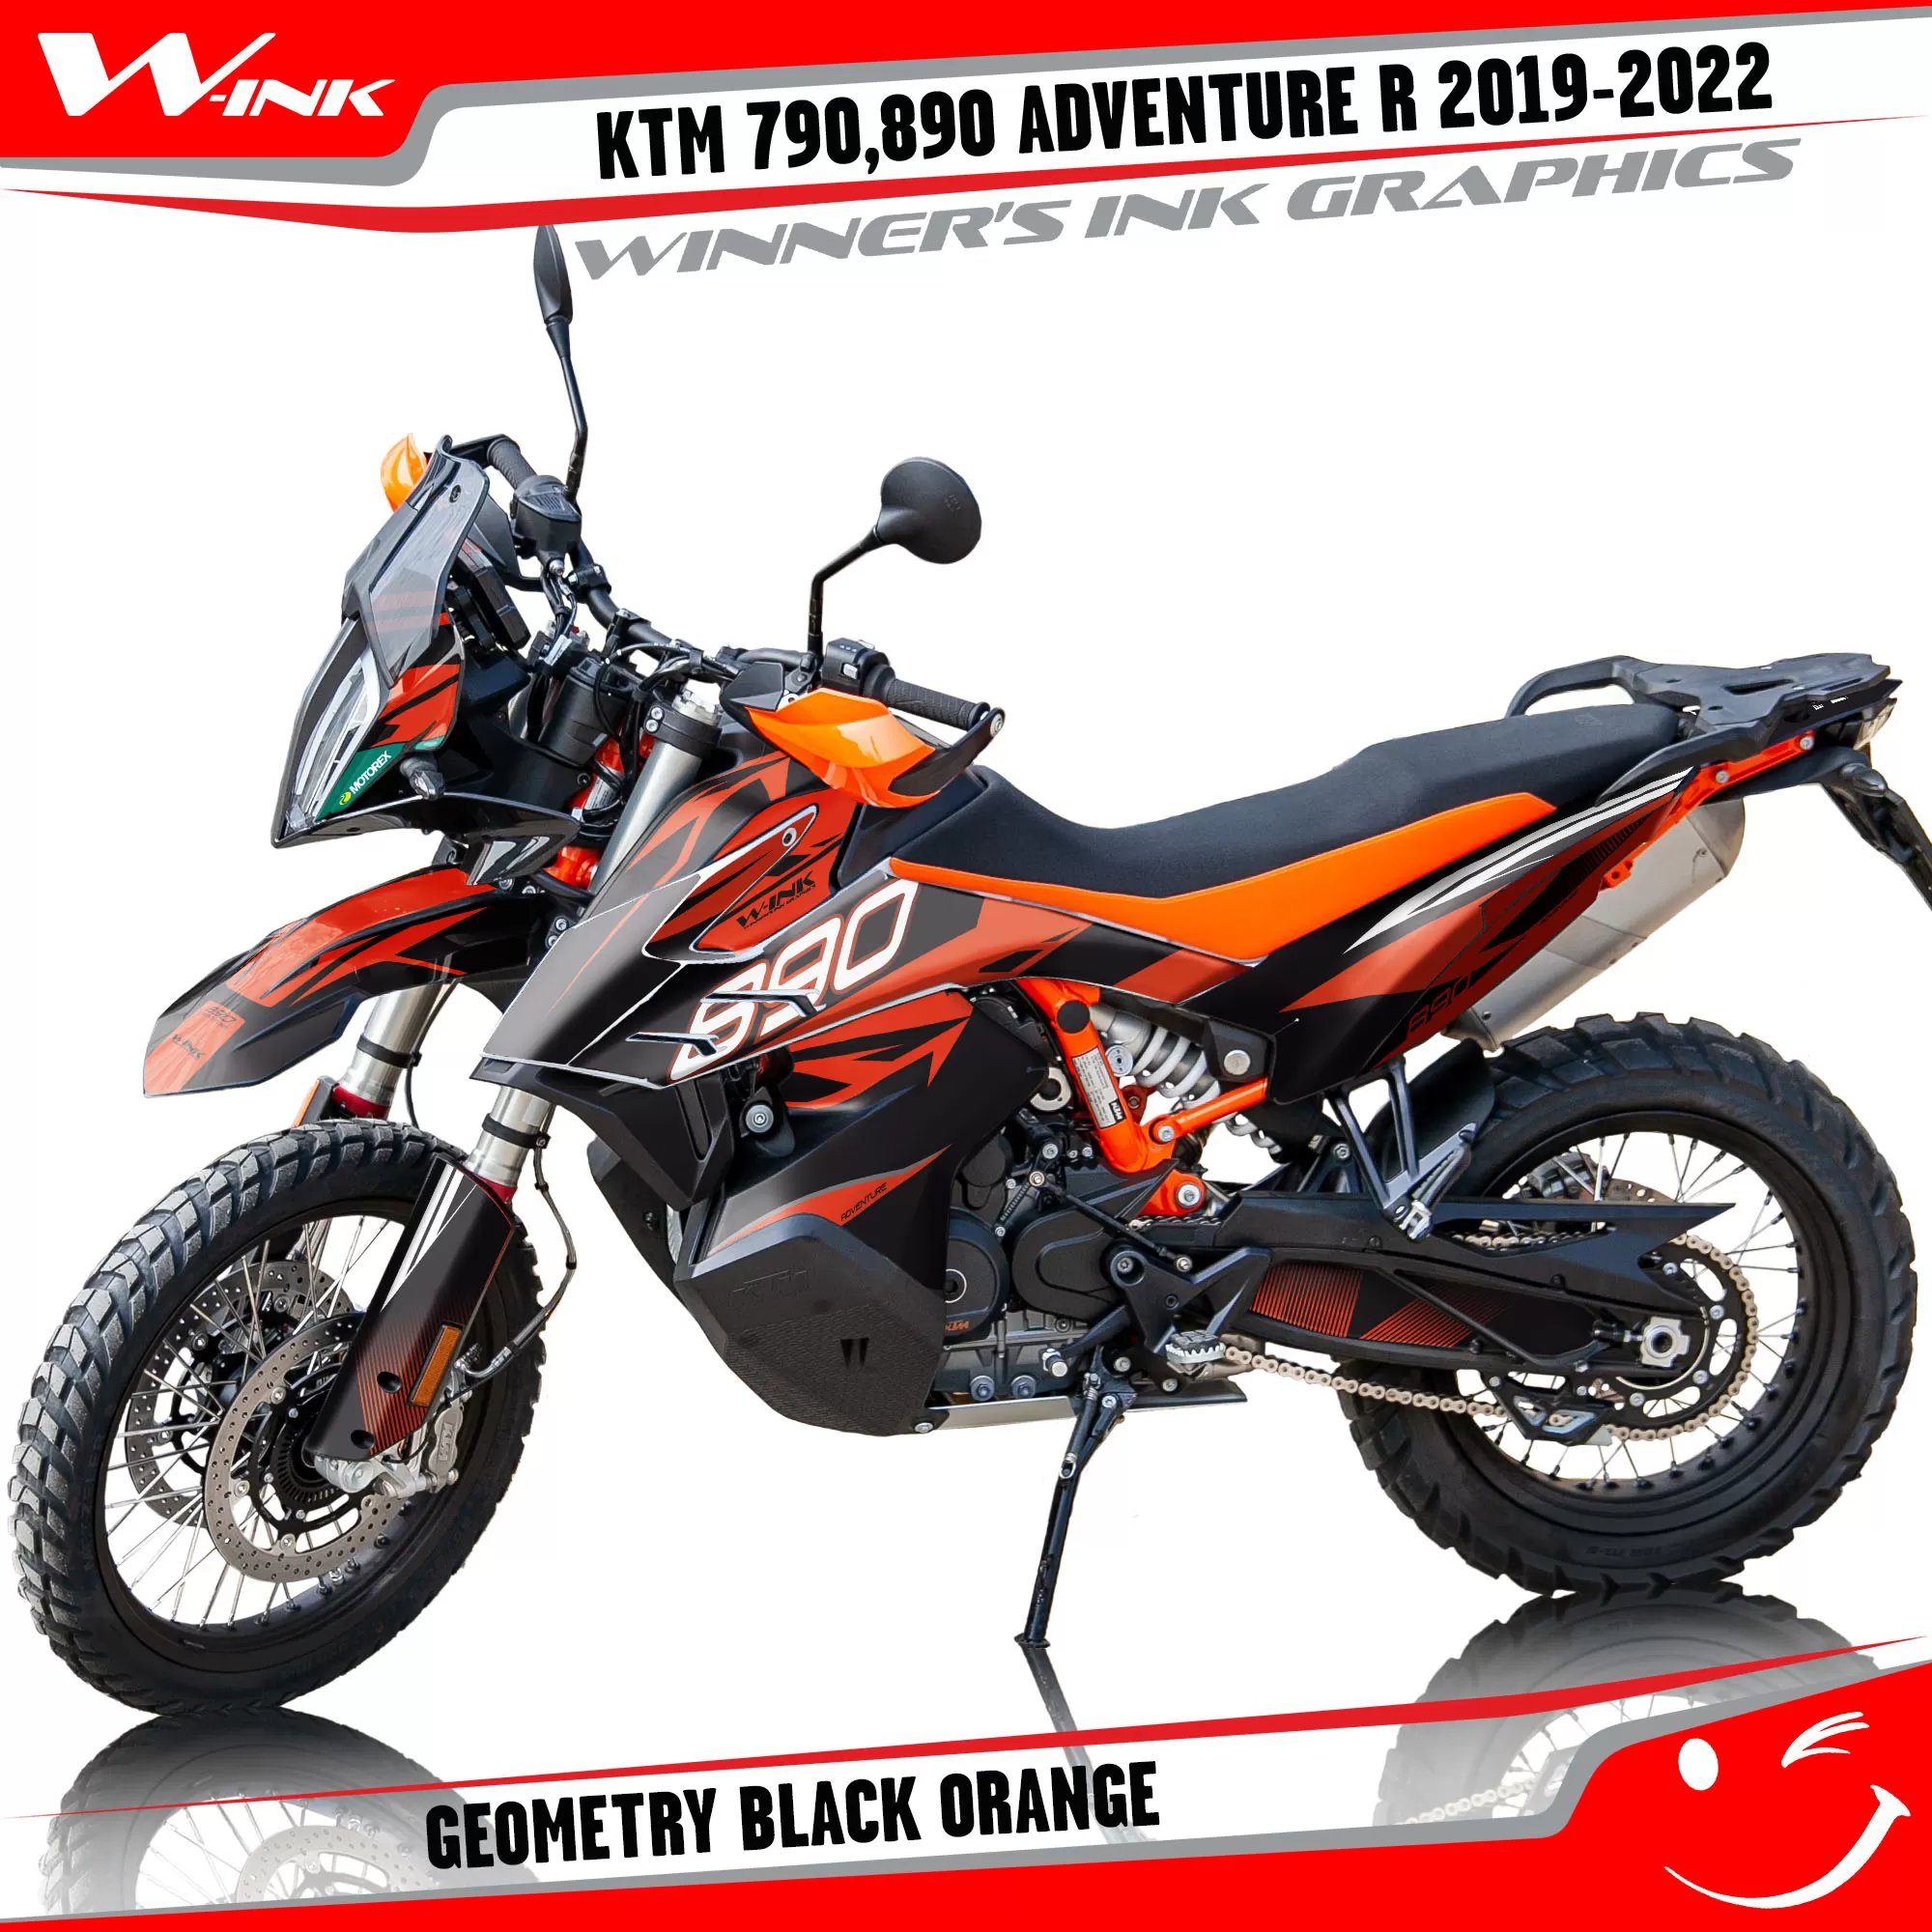 Adventure-R-790-890-2019-2020-2021-2022-graphics-kit-and-decals-with-designs-Geometry-Black-Orange